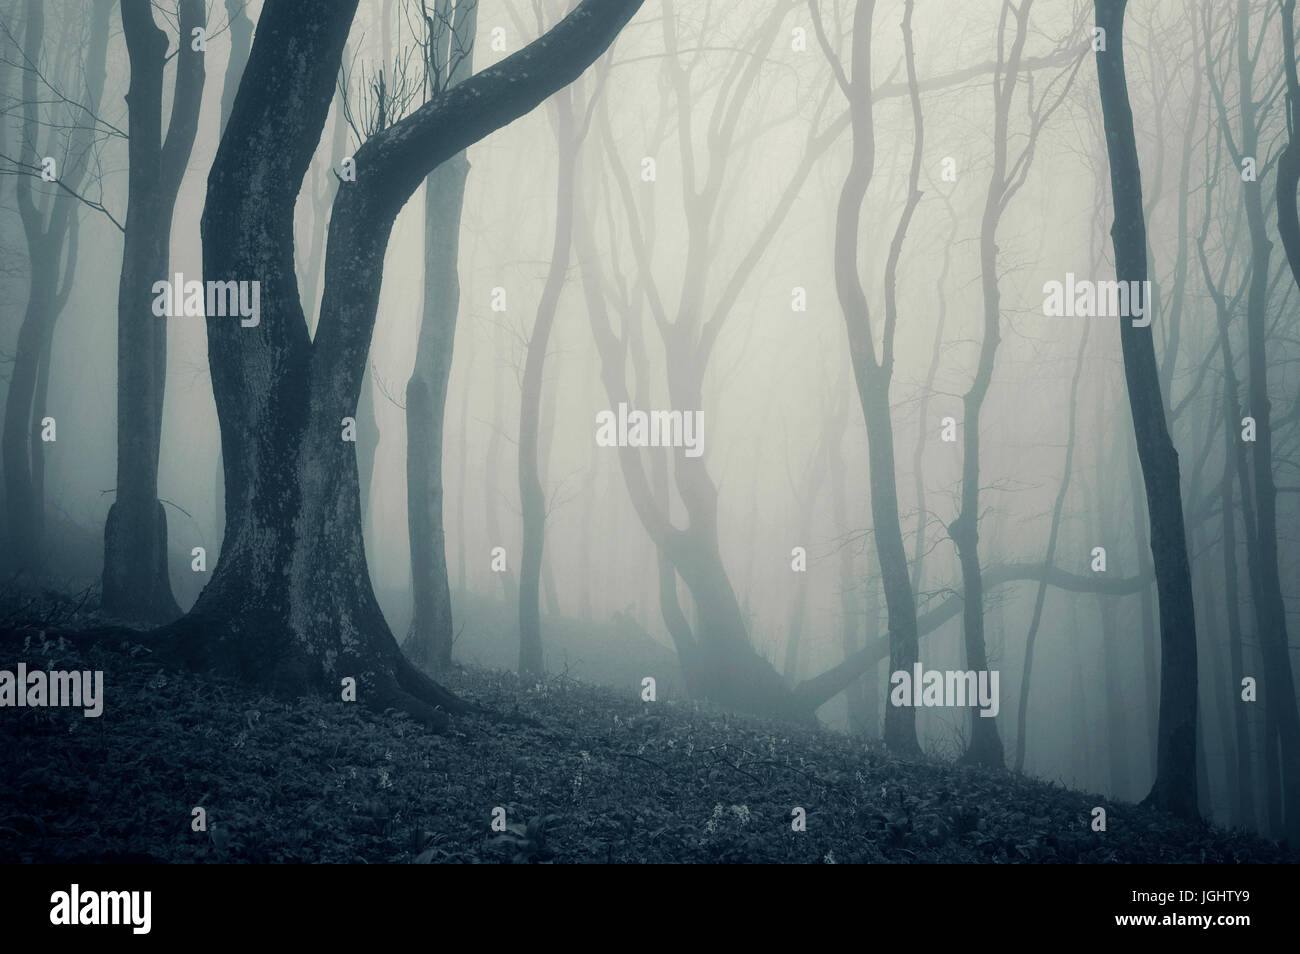 dark scary halloween forest landscape with twisted old trees in fog Stock Photo